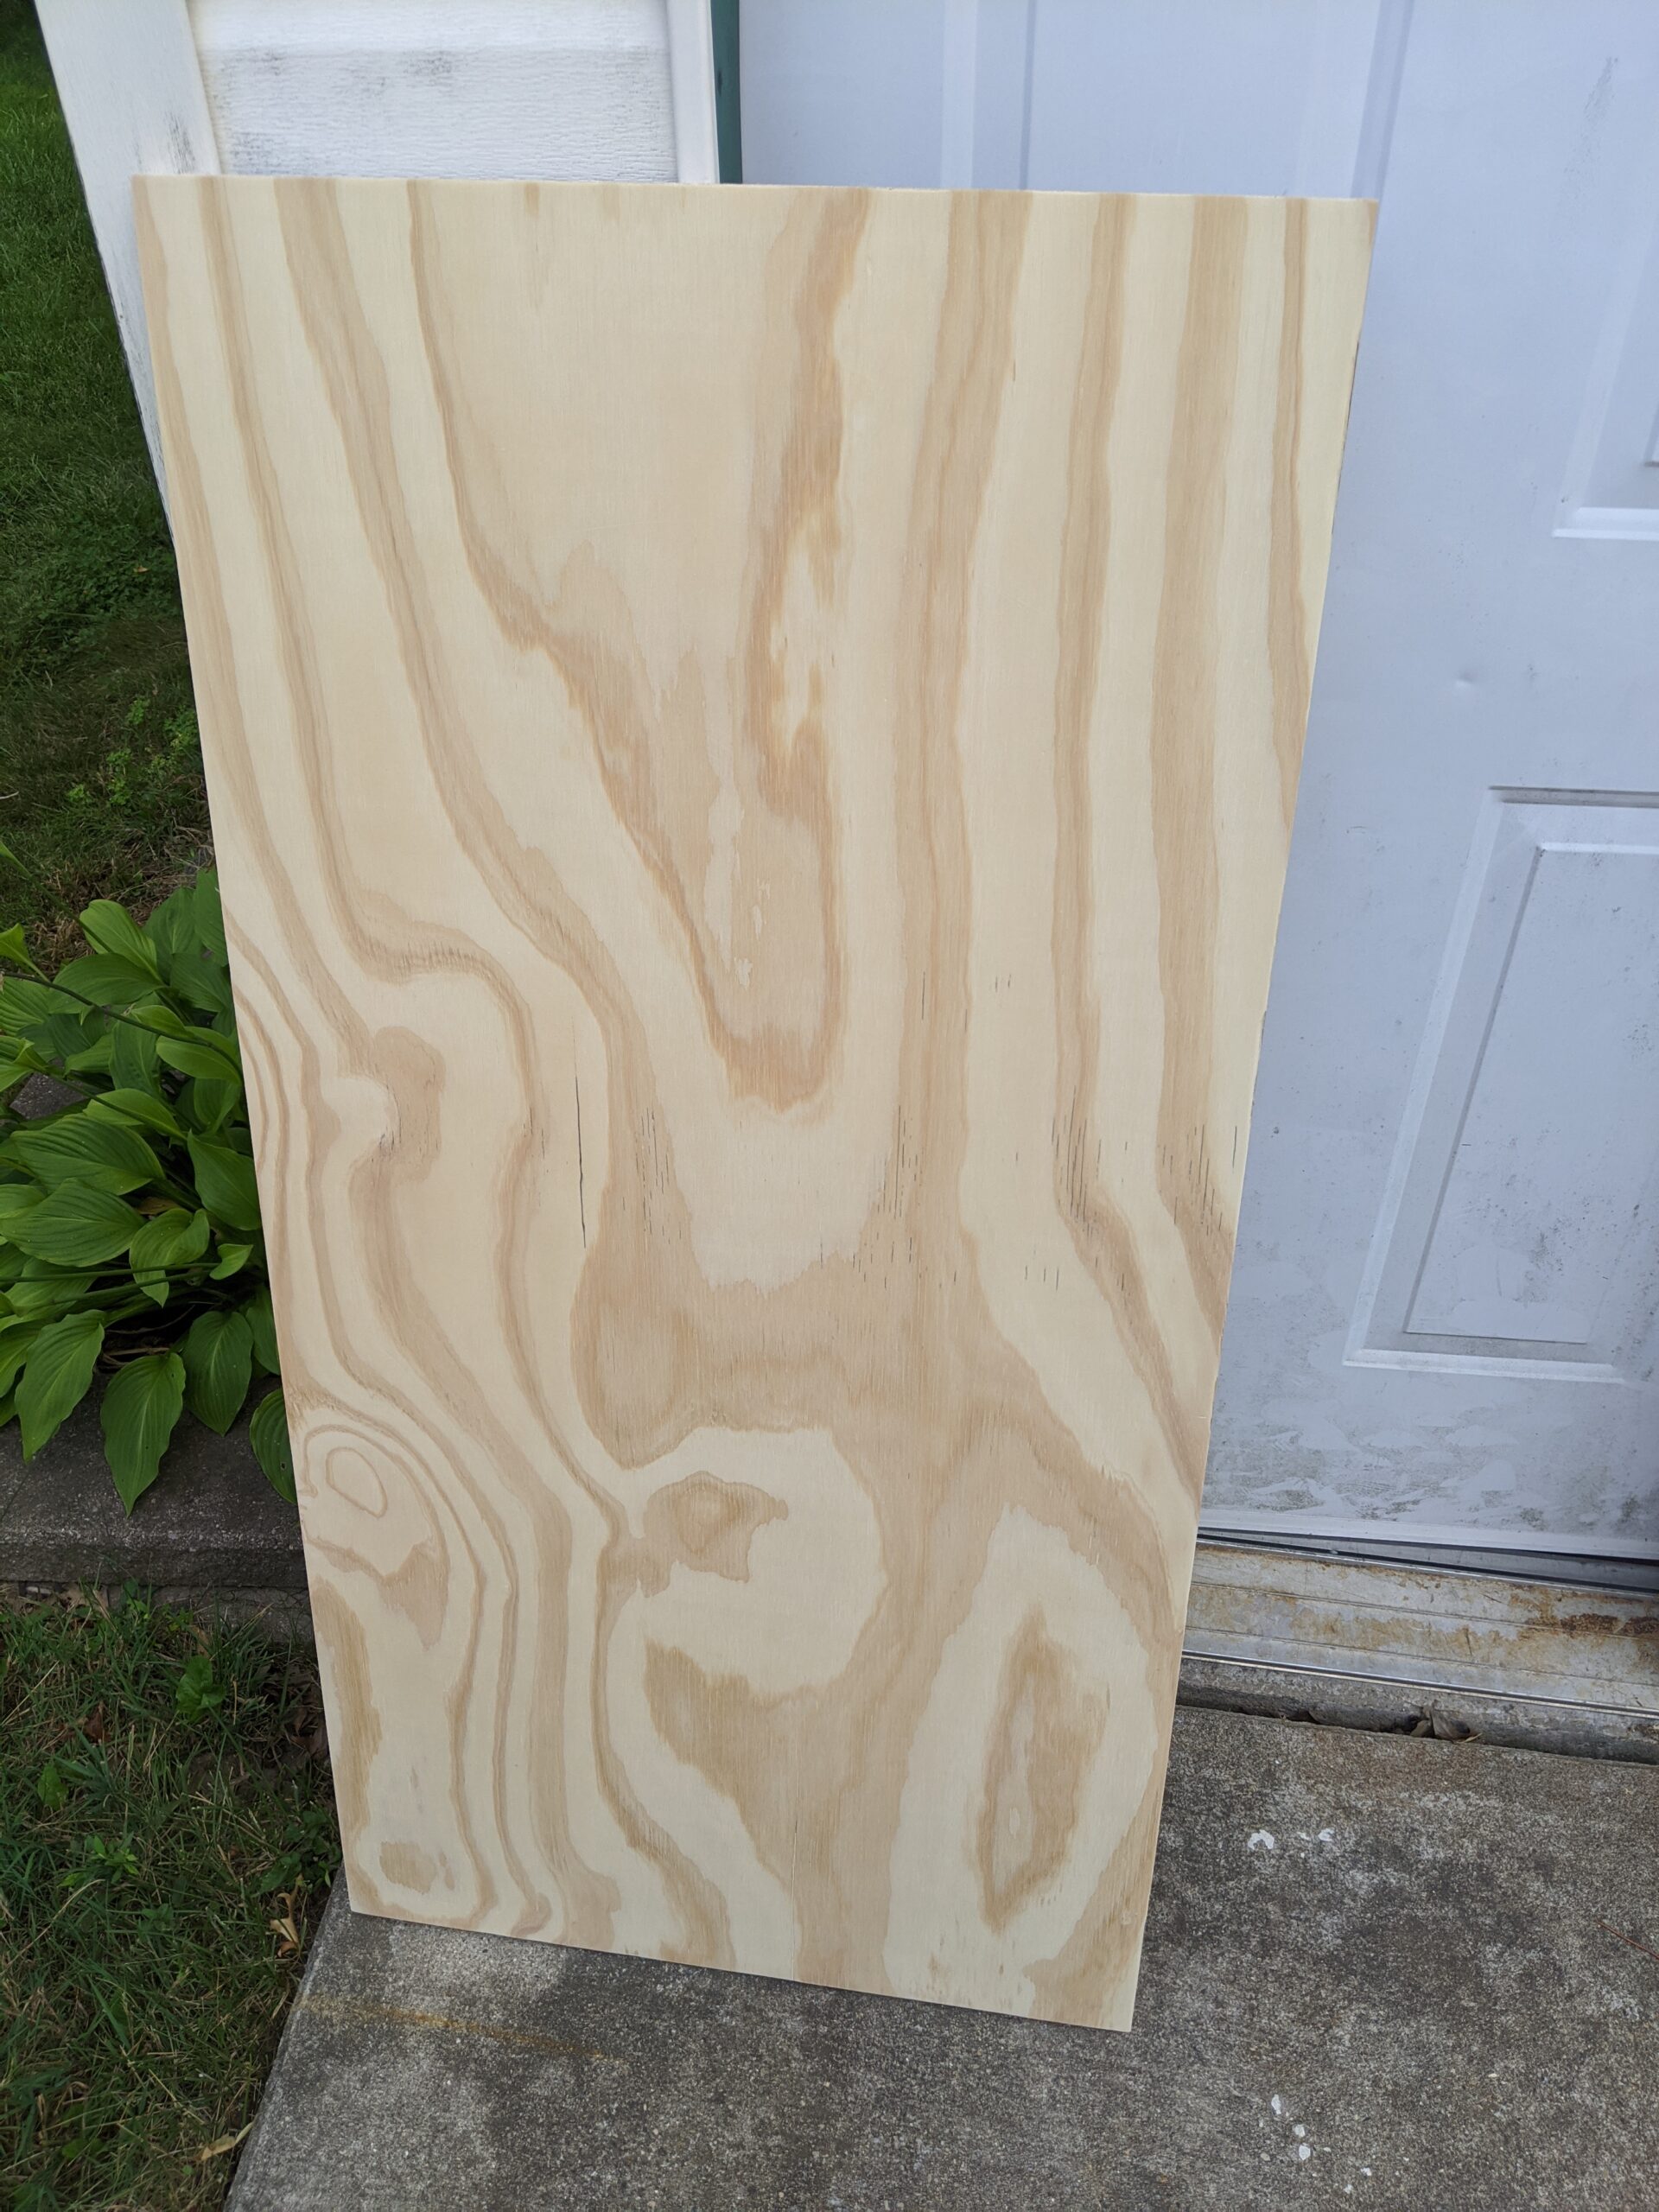 2x4 project panel